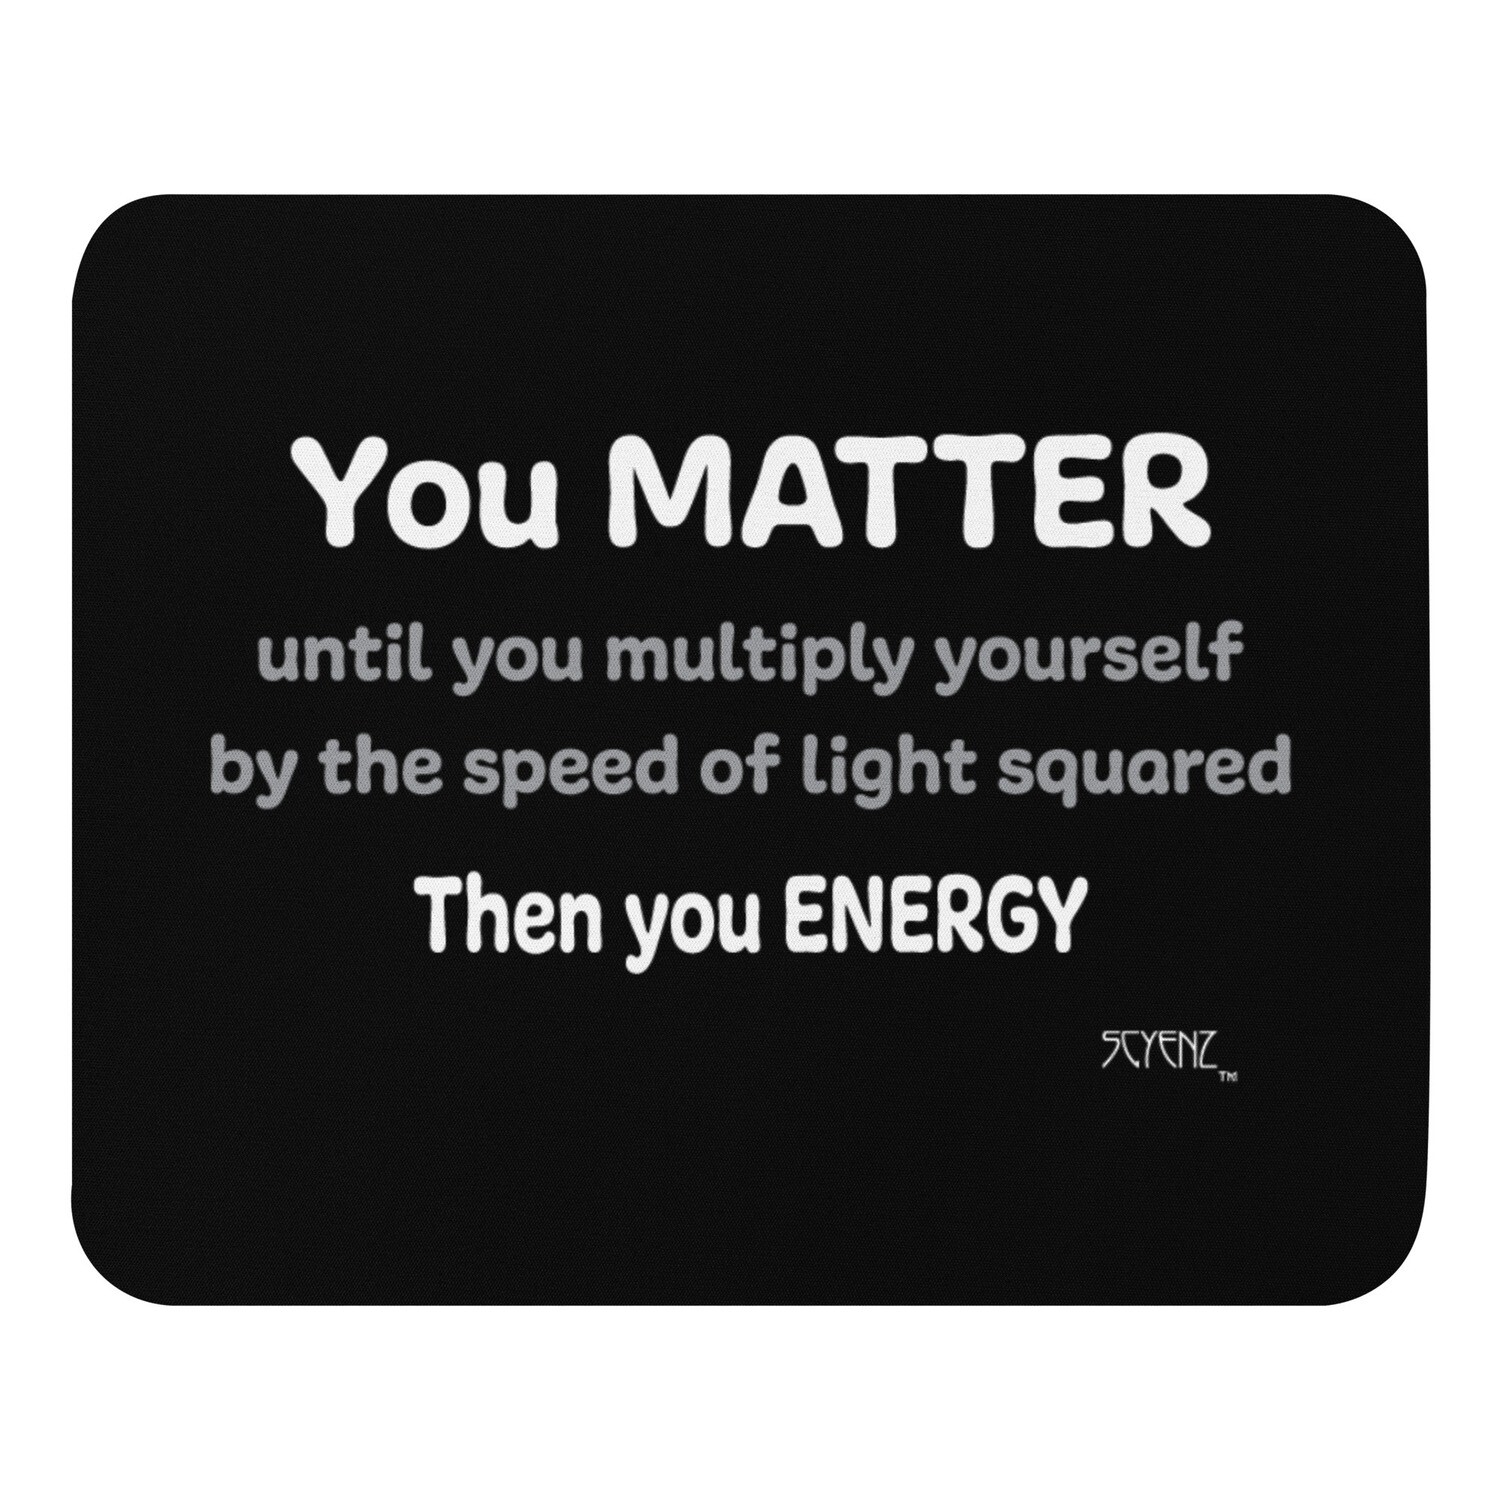 You_Matter SCYENZ Mouse pad - Science and Math Collection